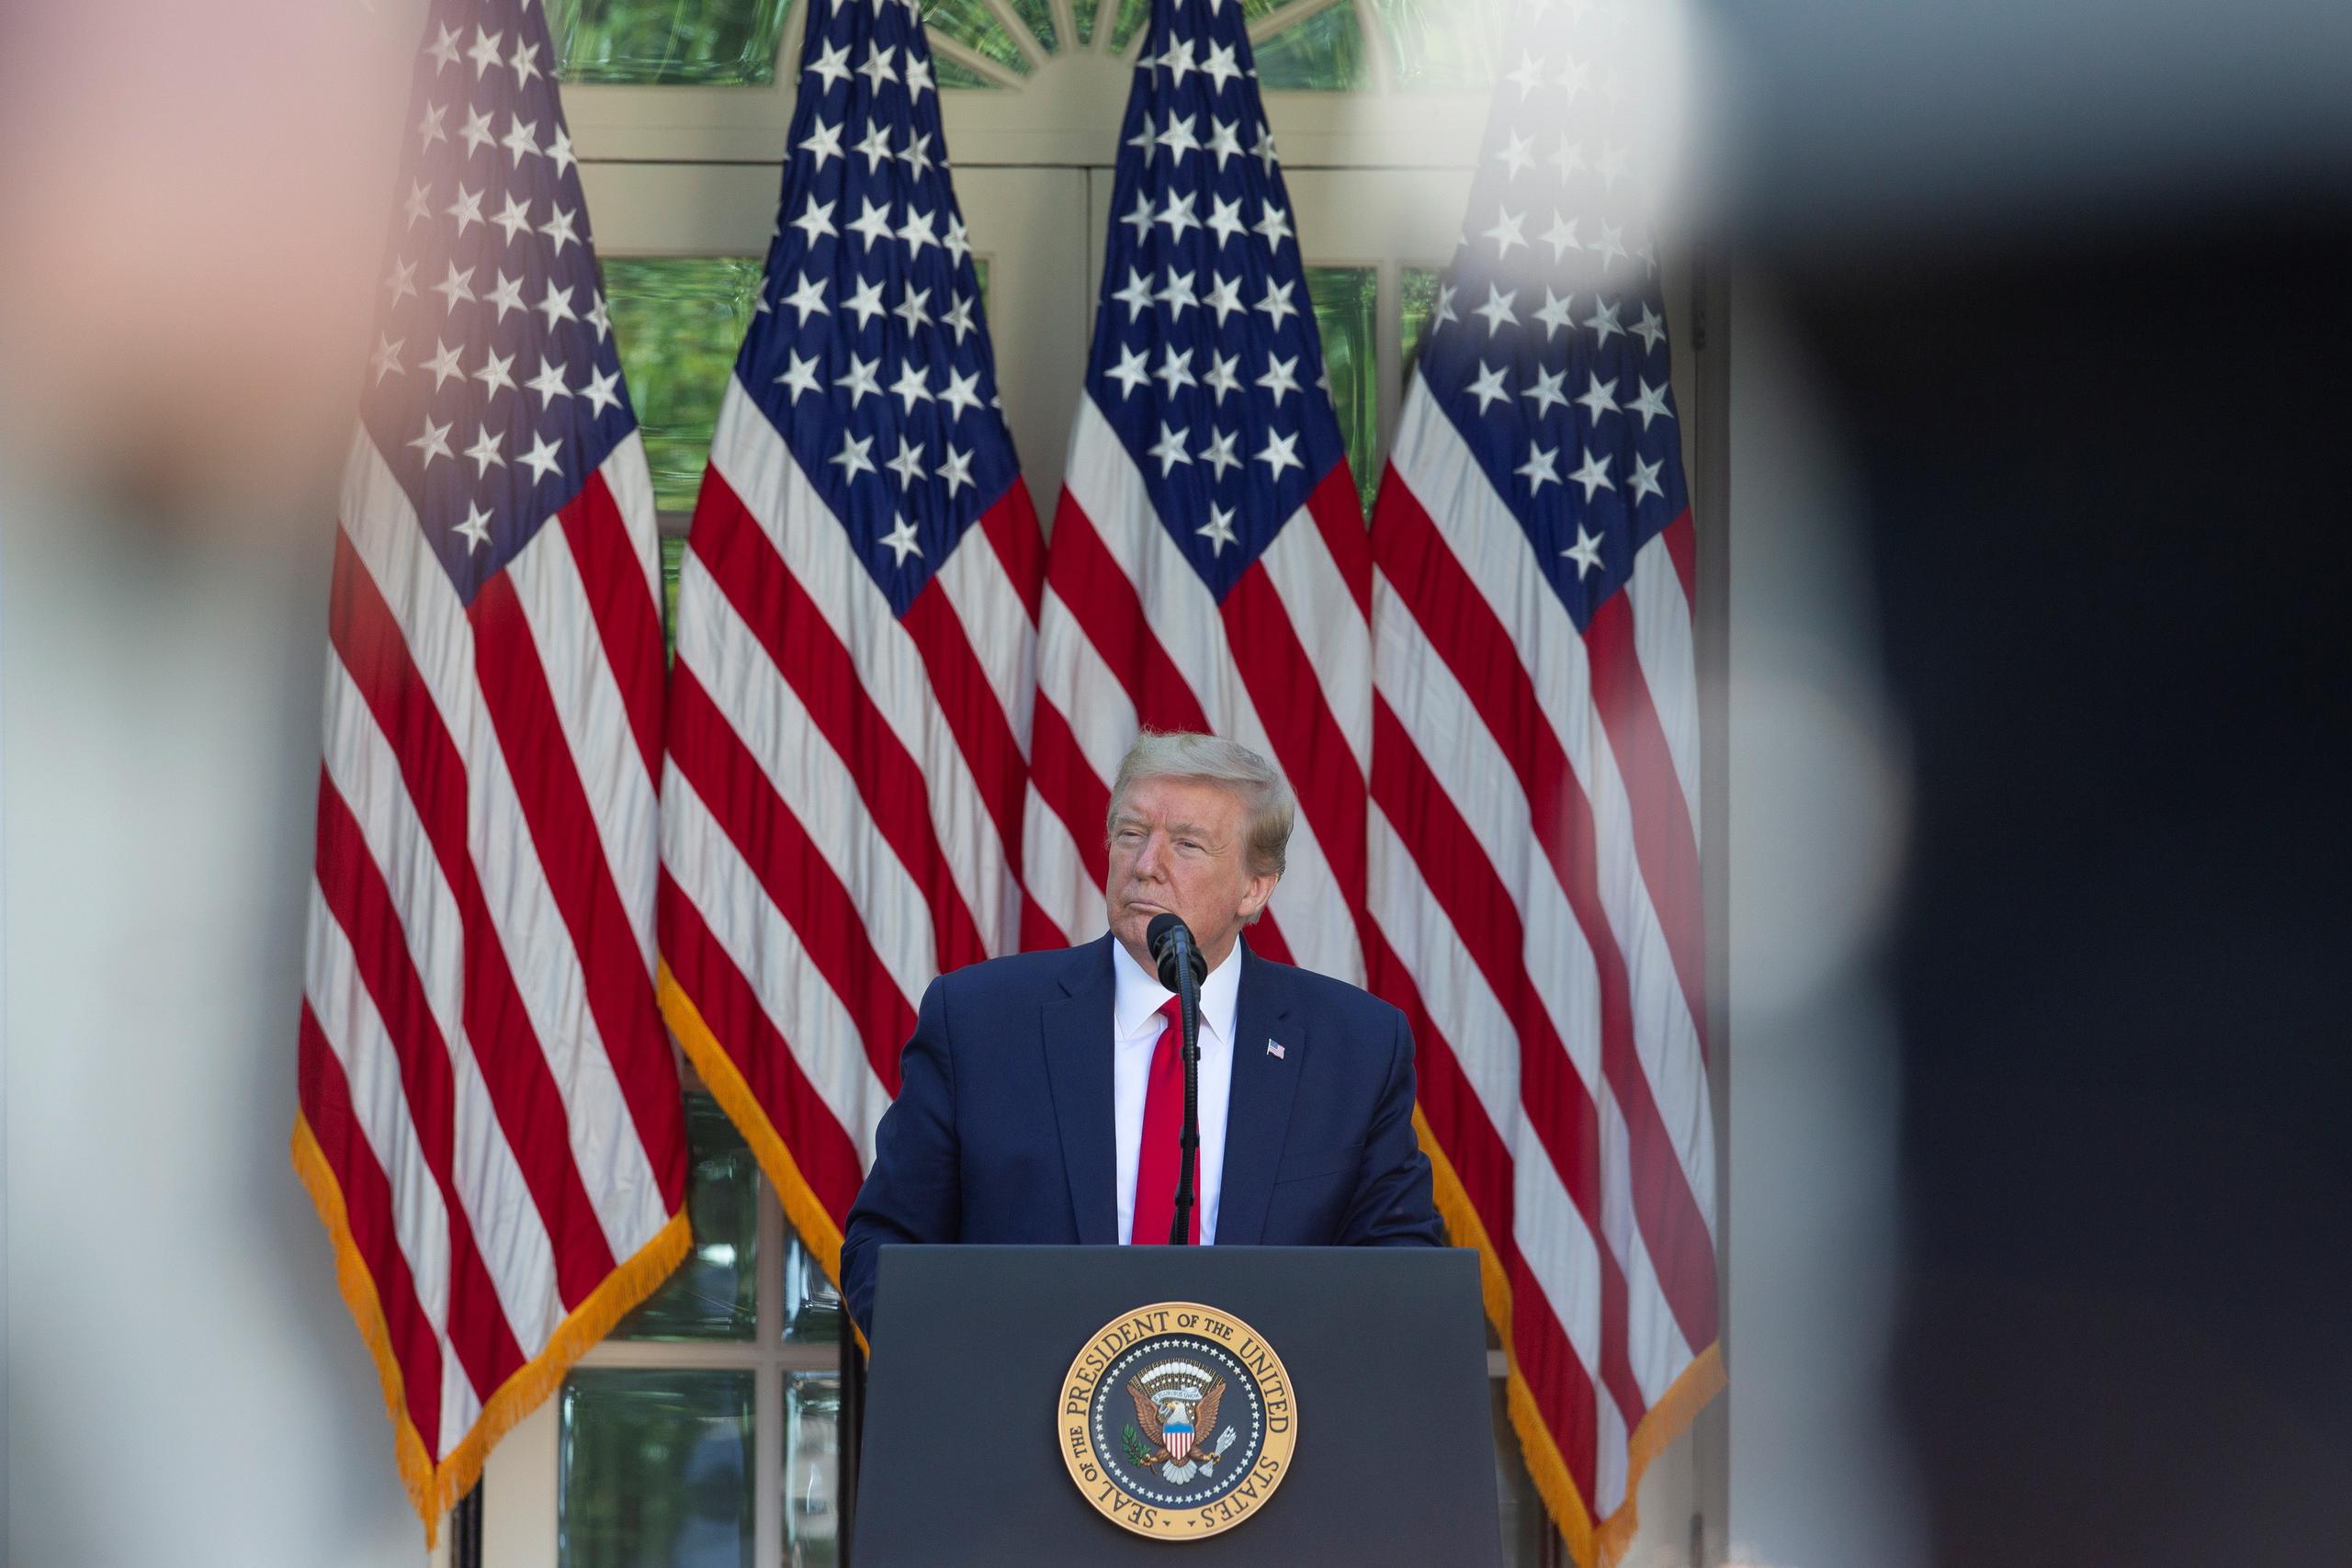 US President Donald J. Trump delivers remarks at the National Day of Prayer Service at the White House in Washington, DC, USA, on 07 May 2020. EFE/EPA/Stefani Reynolds / POOL
